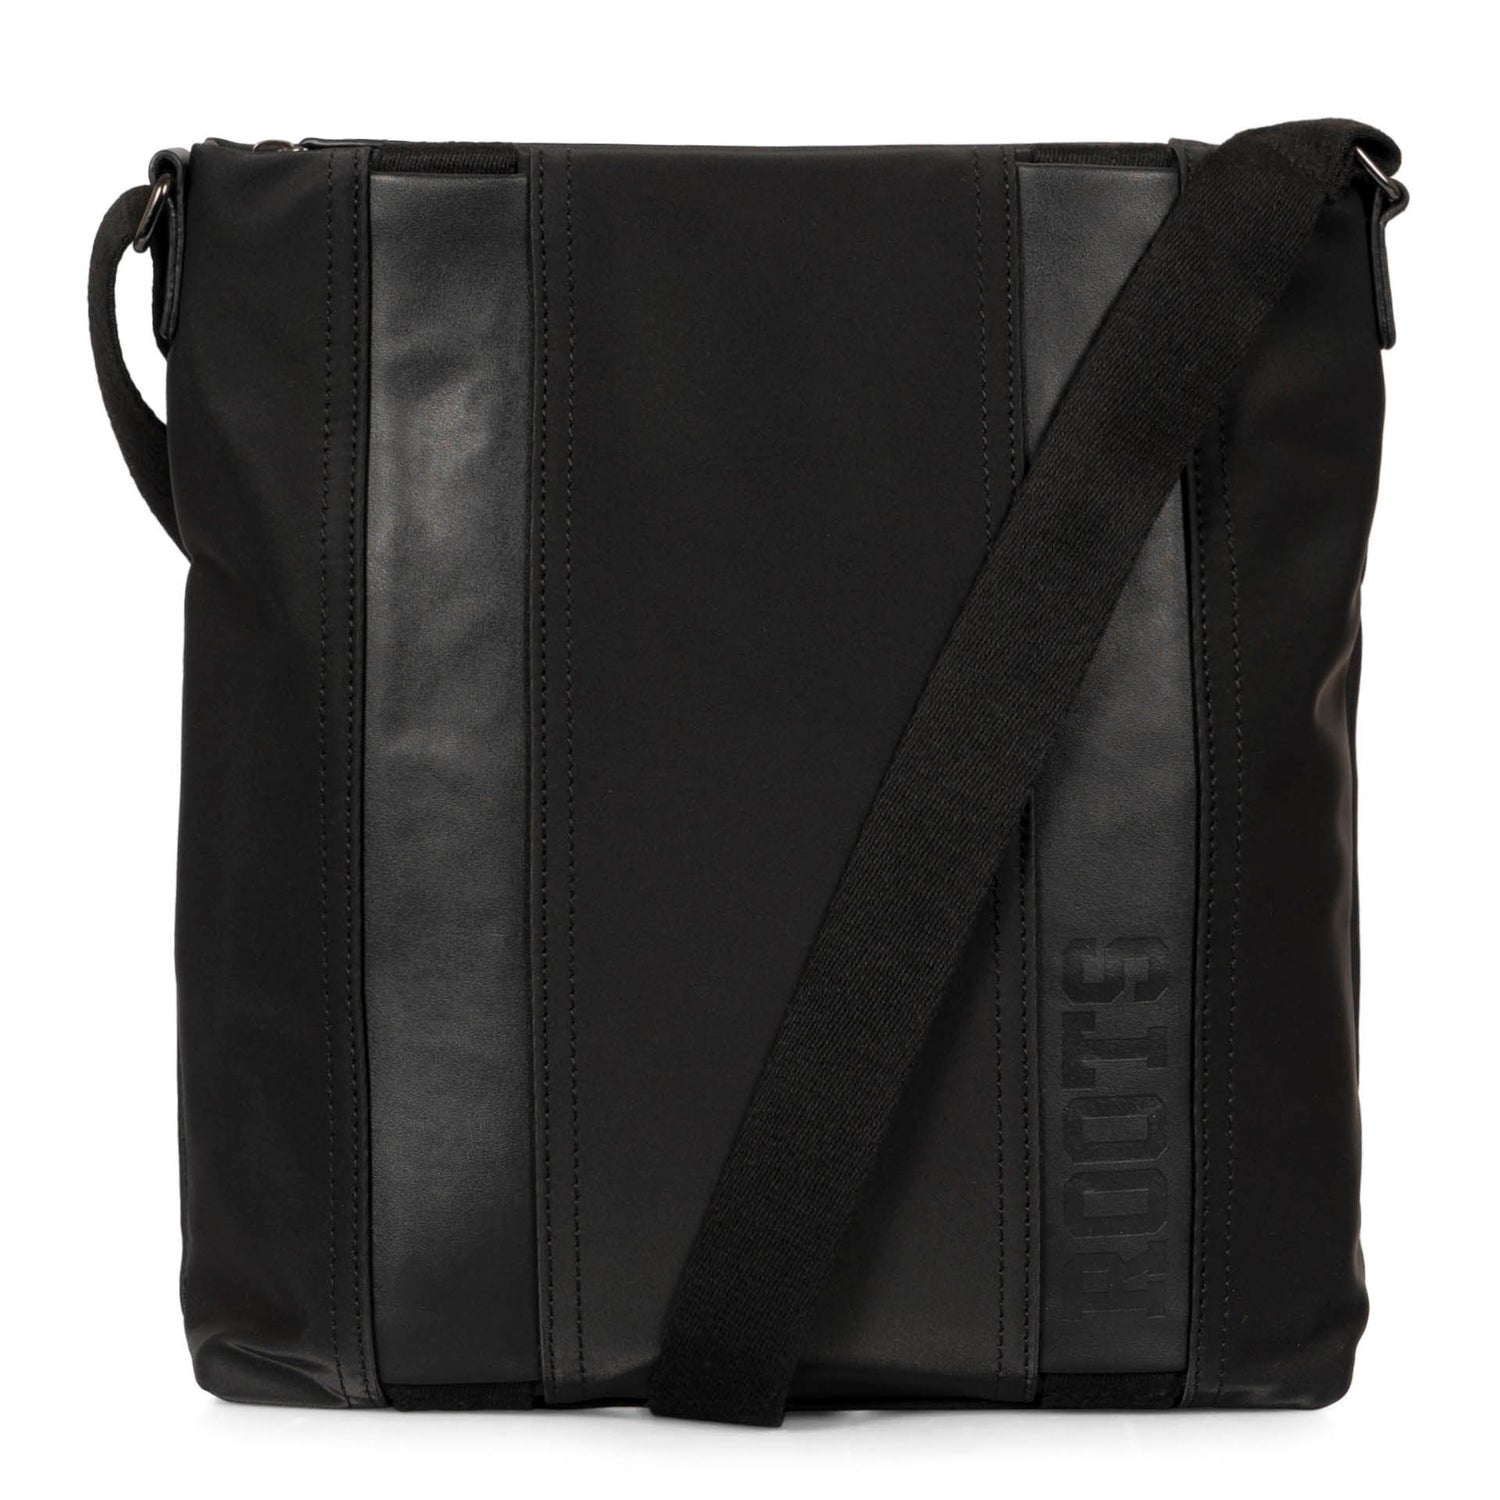 Front side of a black men's crossbody bag called Dilan designed by Roots showing its strap, logo, and texture contrast.